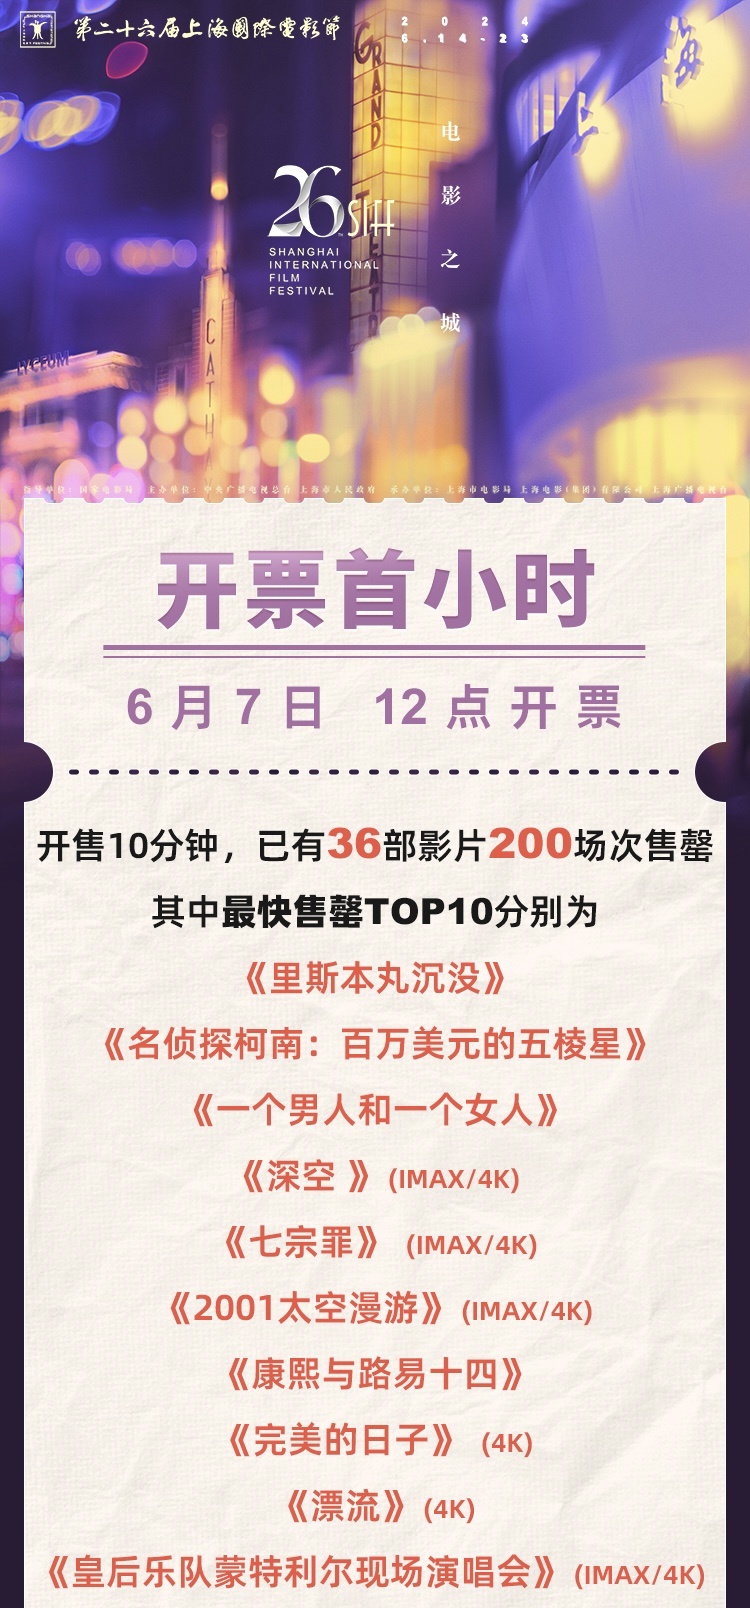 Improvements Made to Shanghai International Film Festival Ticketing Experience on Taopiaopiao